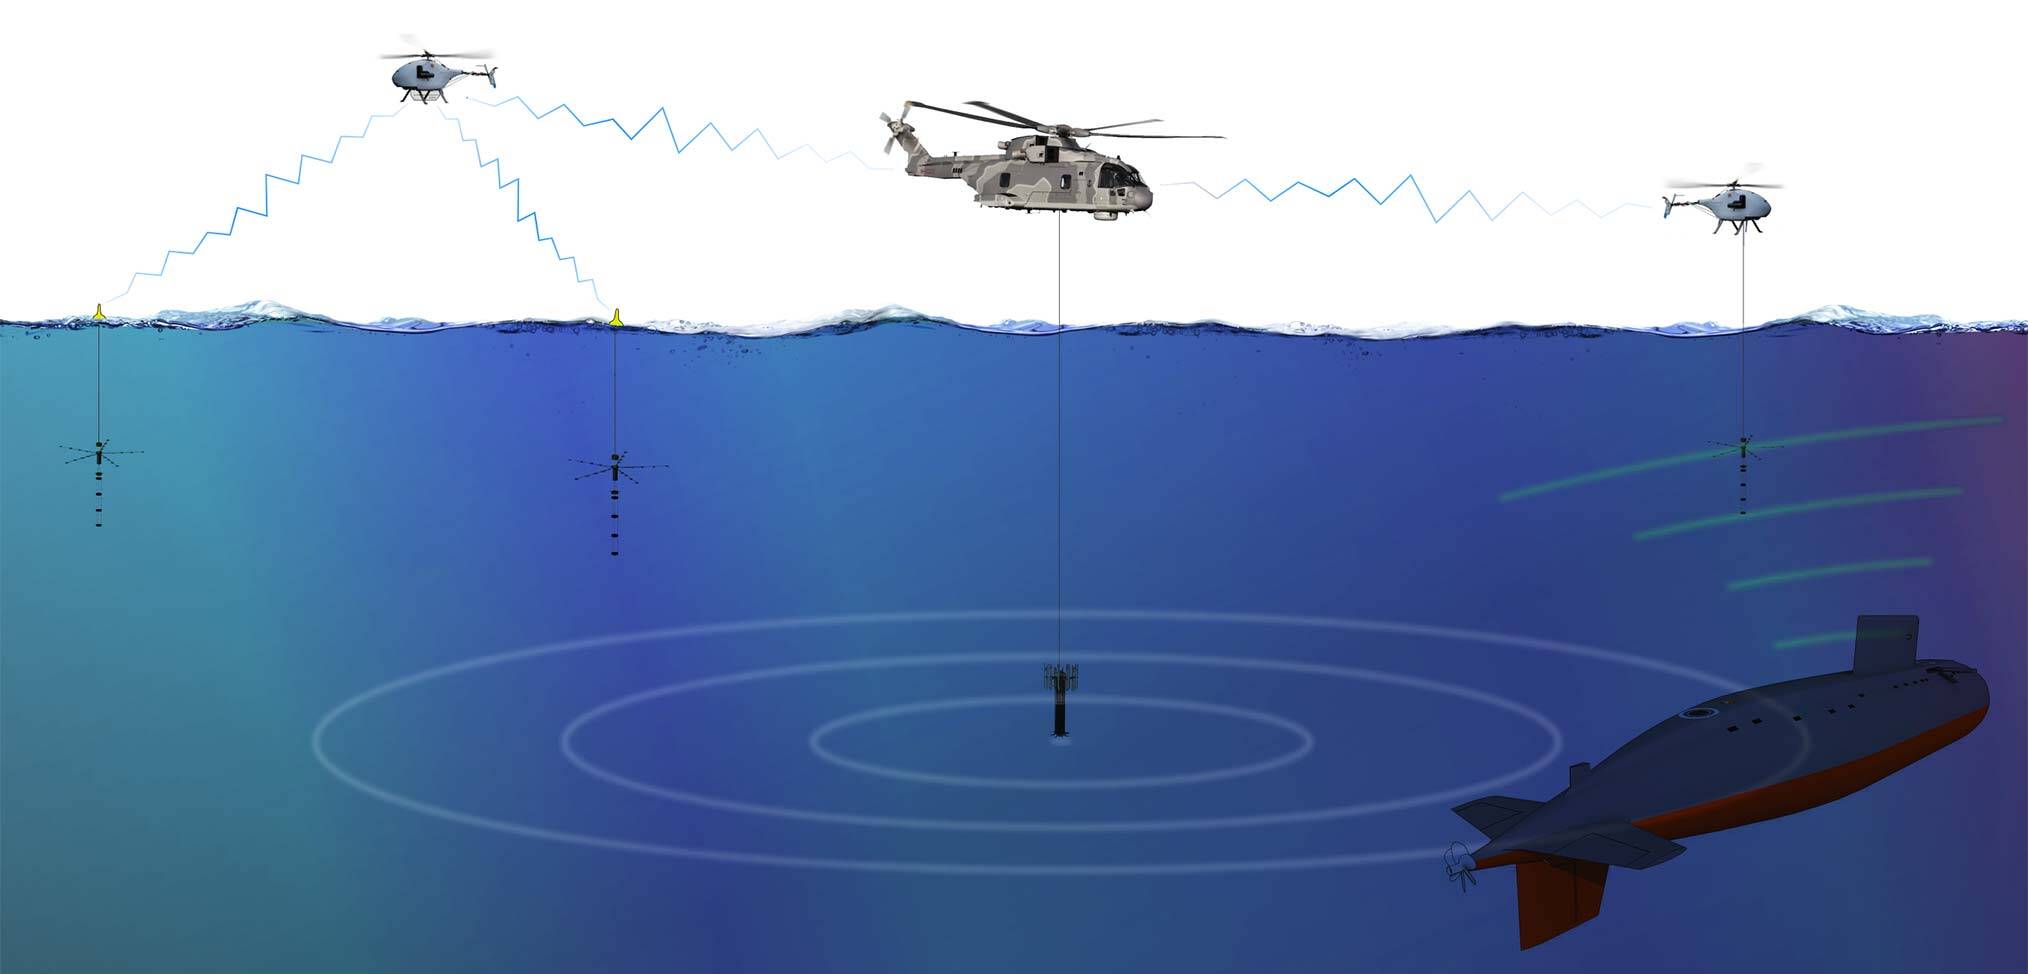 Hunting submarines with drones